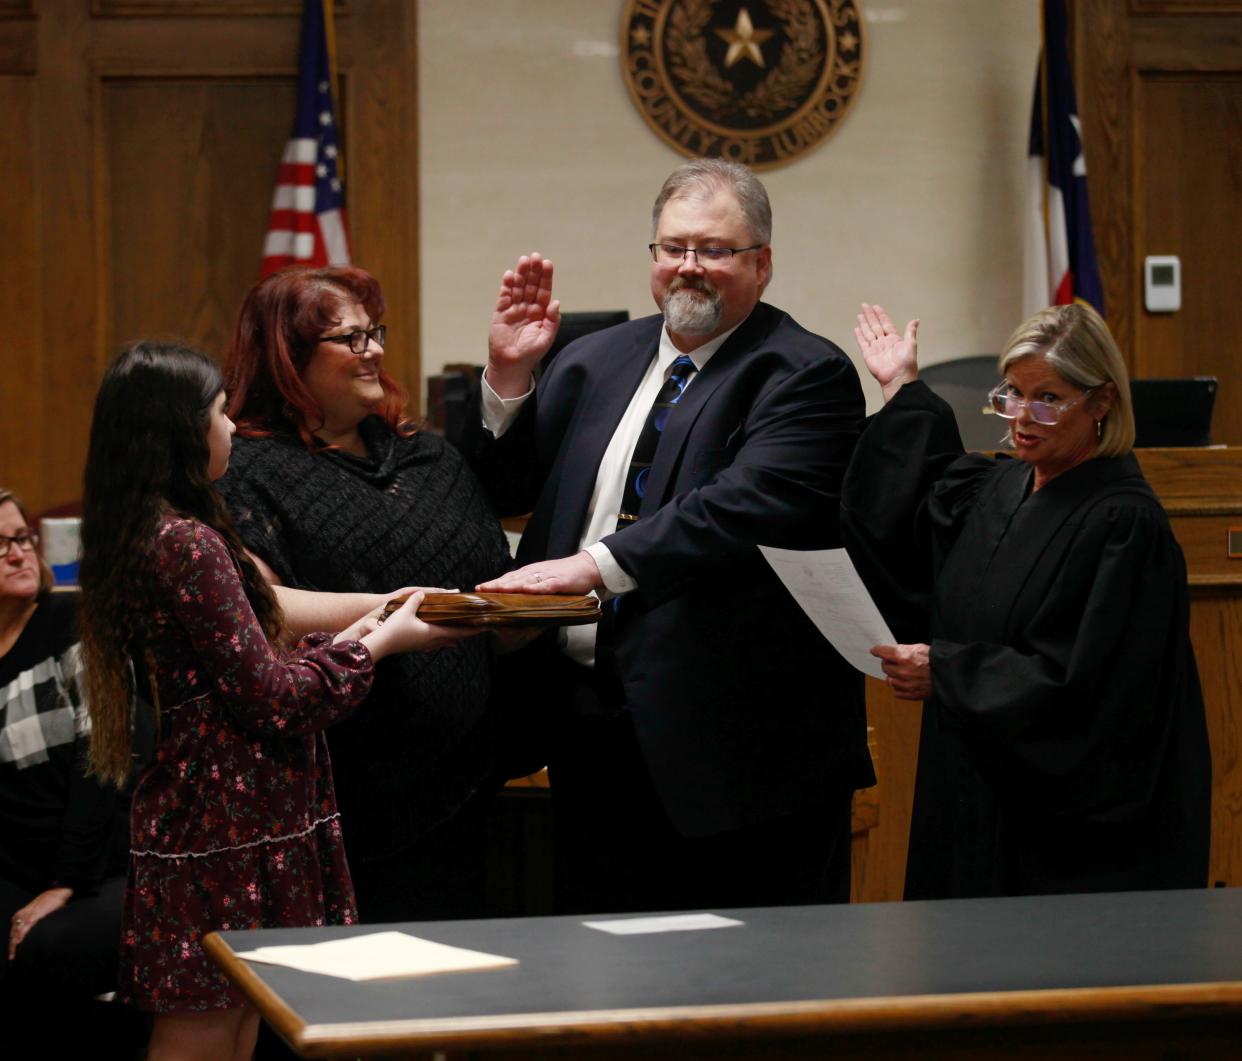 Former prosecutor Tom Brummett, center, is sworn in as judge of Lubbock County Court at Law #2 by outgoing judge Drue Farmer on Tuesday.